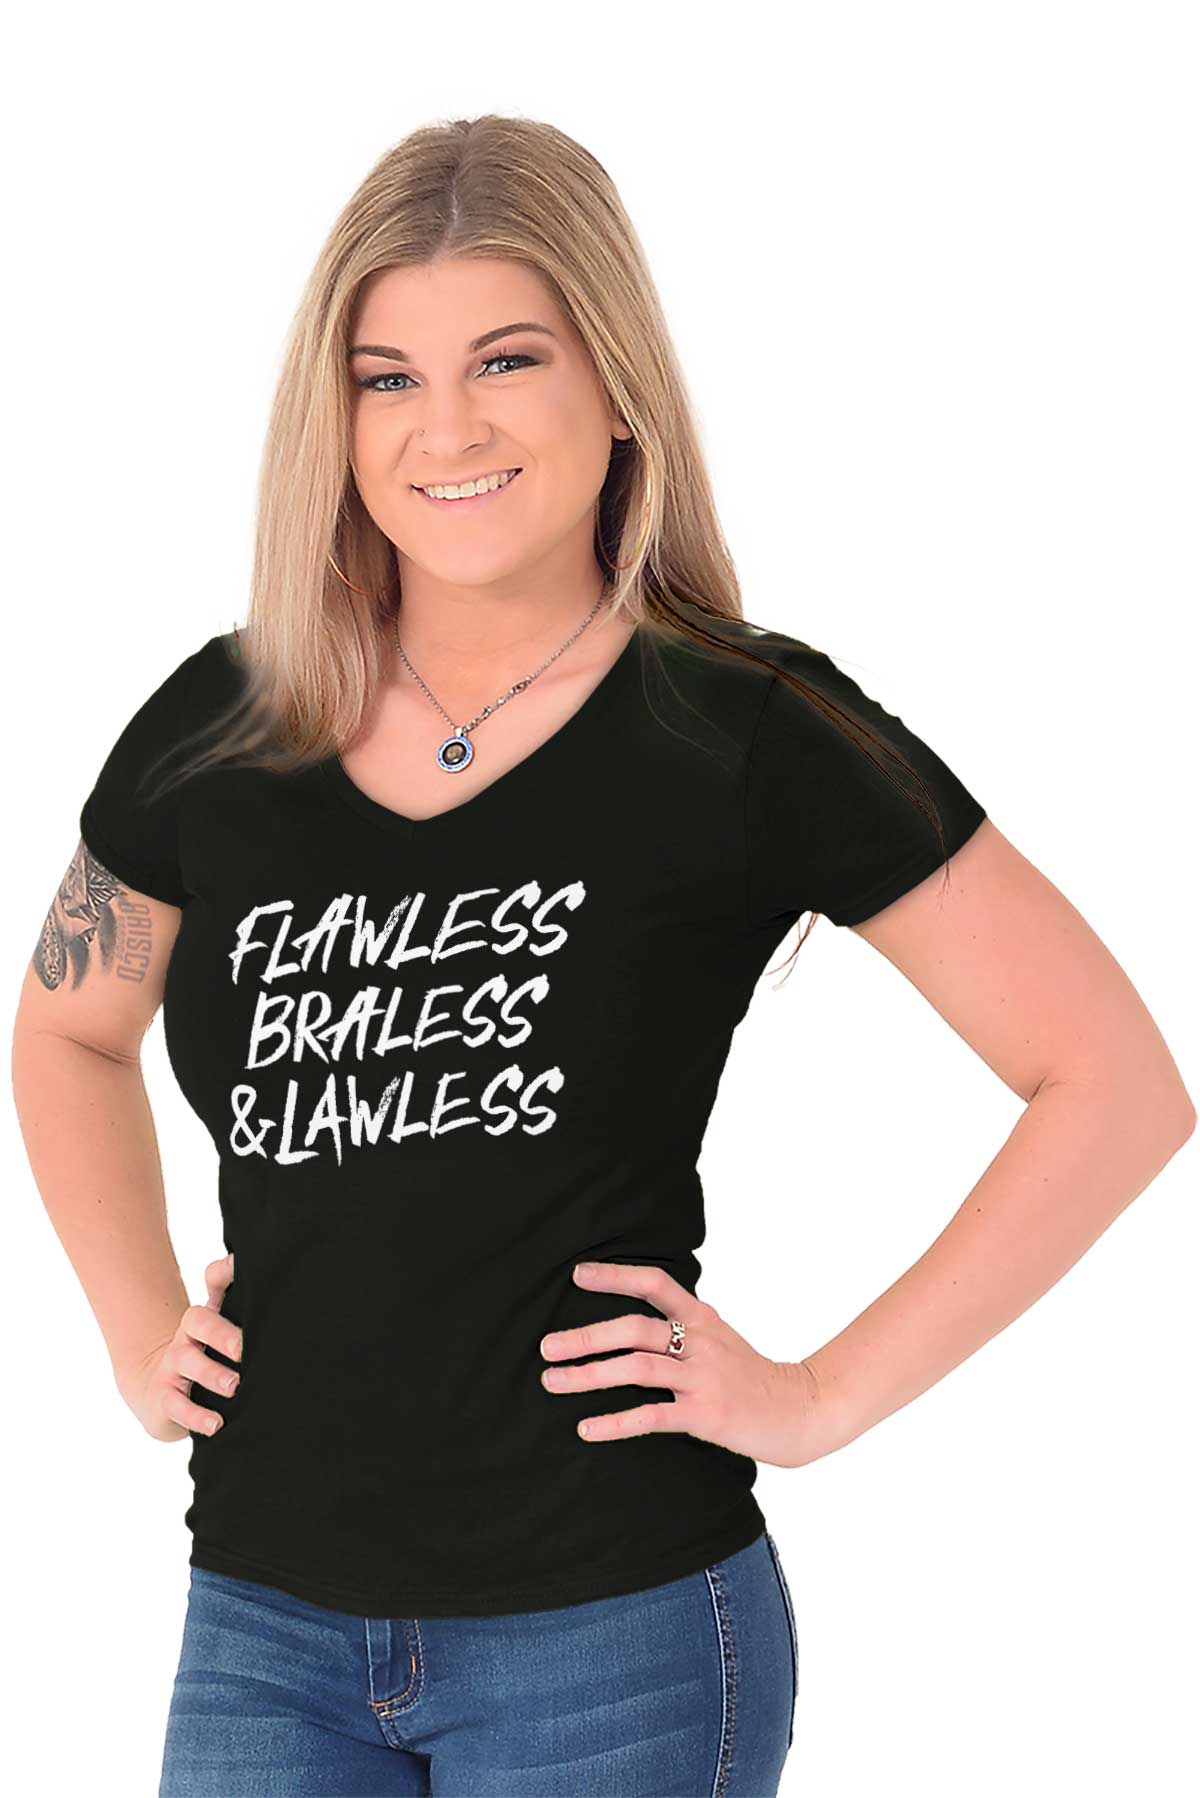 Flawless Braless Girl Power Feminist Rally Womens Fitted V Neck Graphic ...